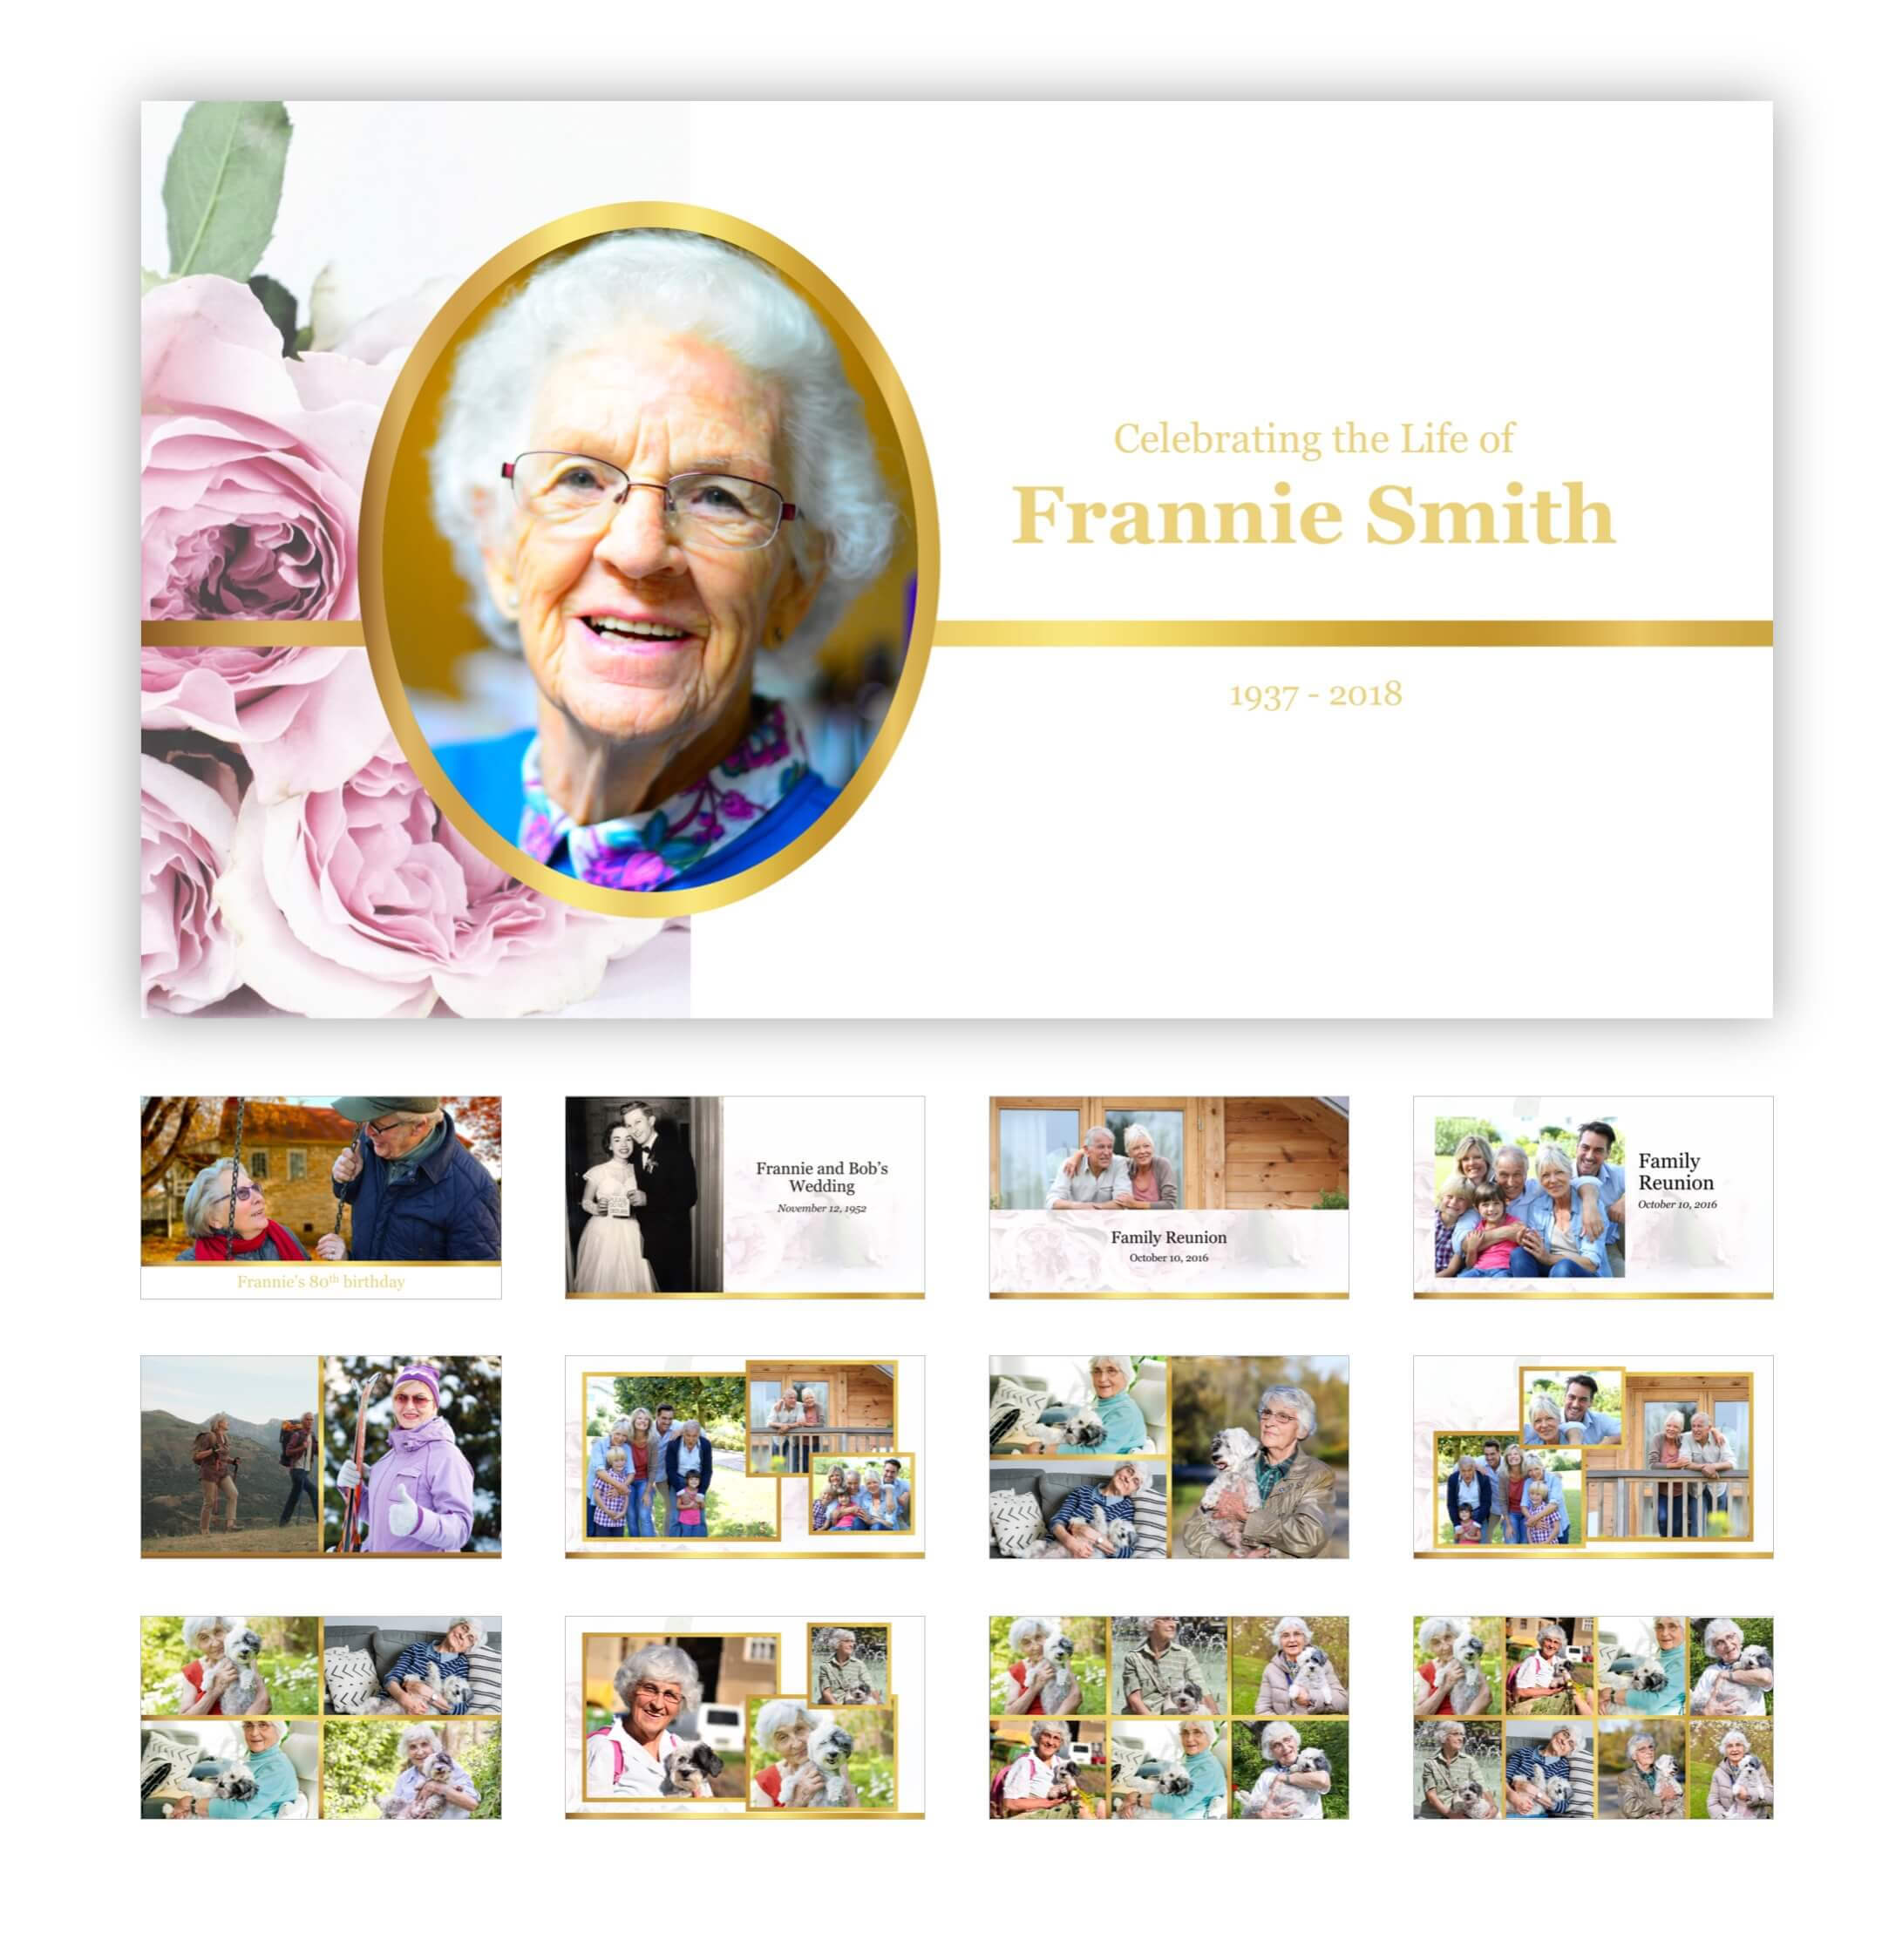 Best Funeral Powerpoint Templates Of 2019 | Adrienne Johnston In Funeral Powerpoint Templates